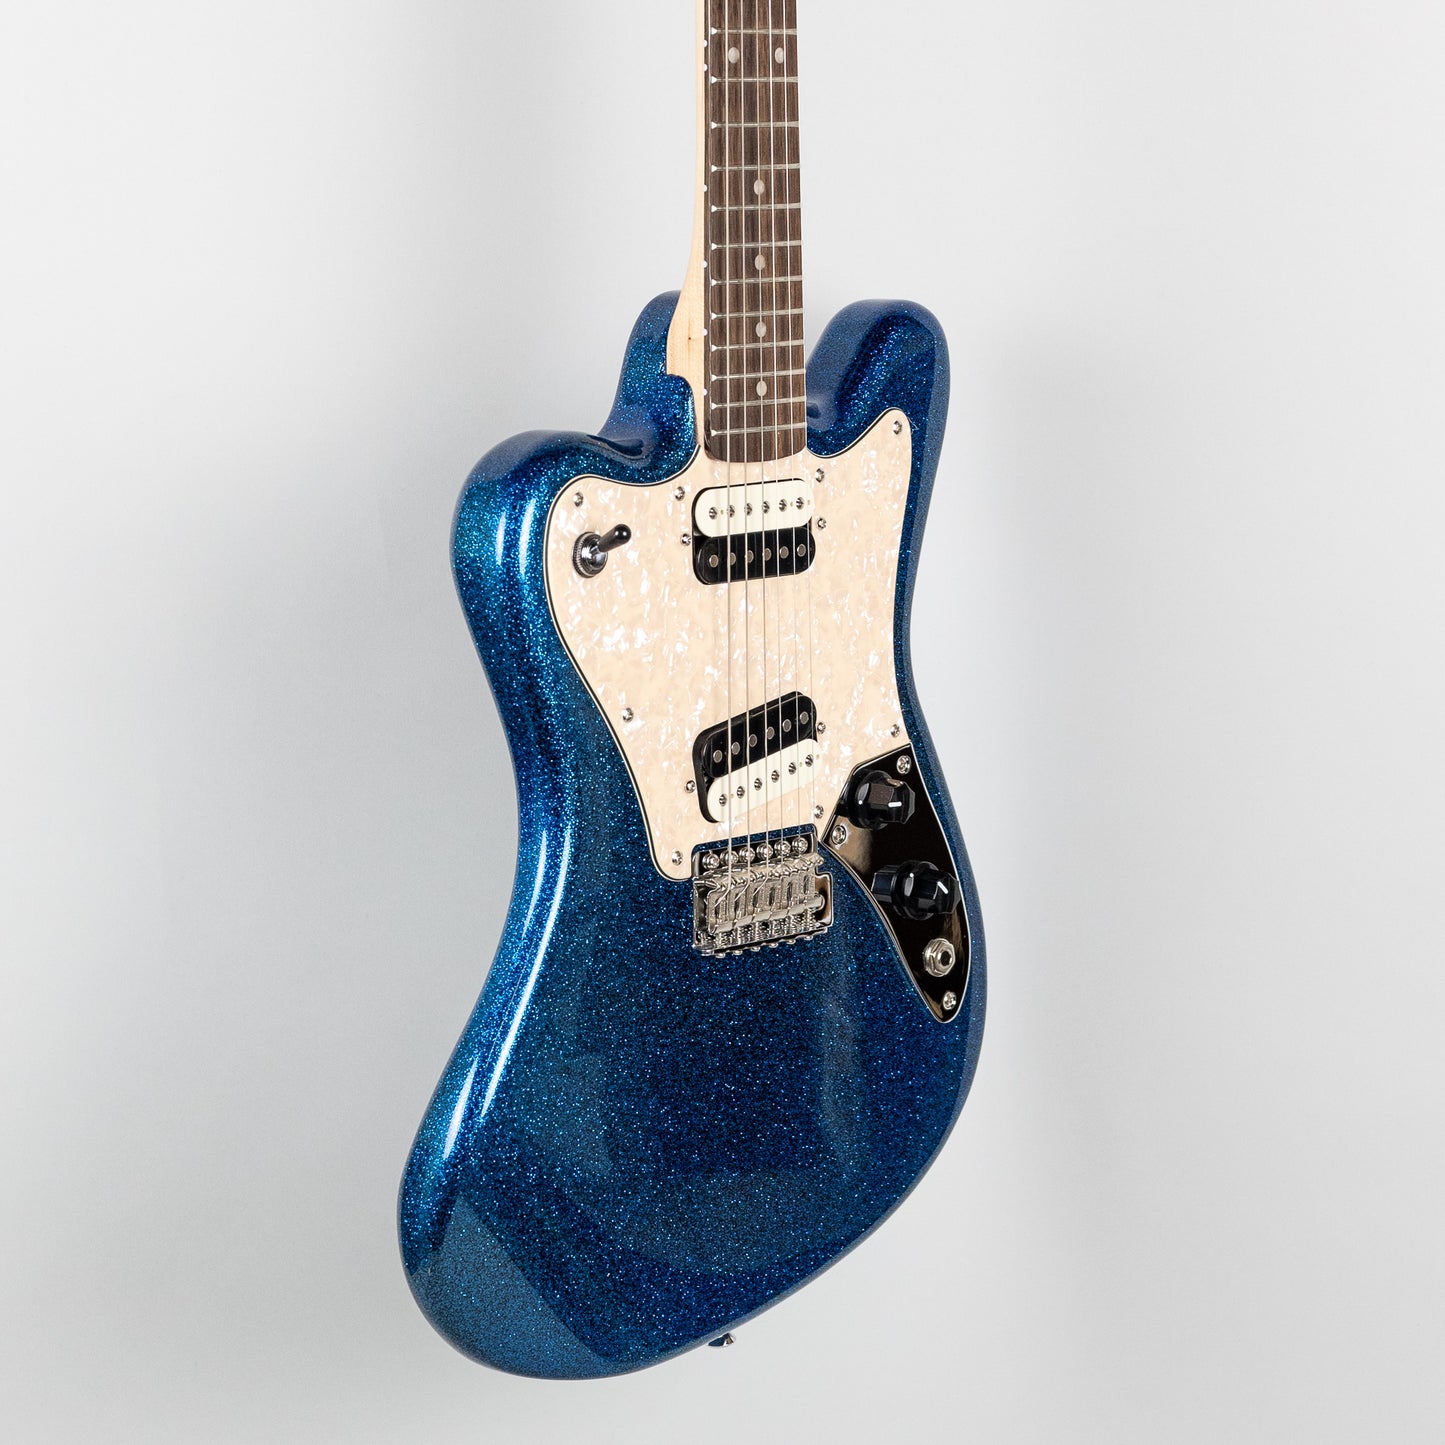 Squier Paranormal Super-Sonic in Blue Sparkle